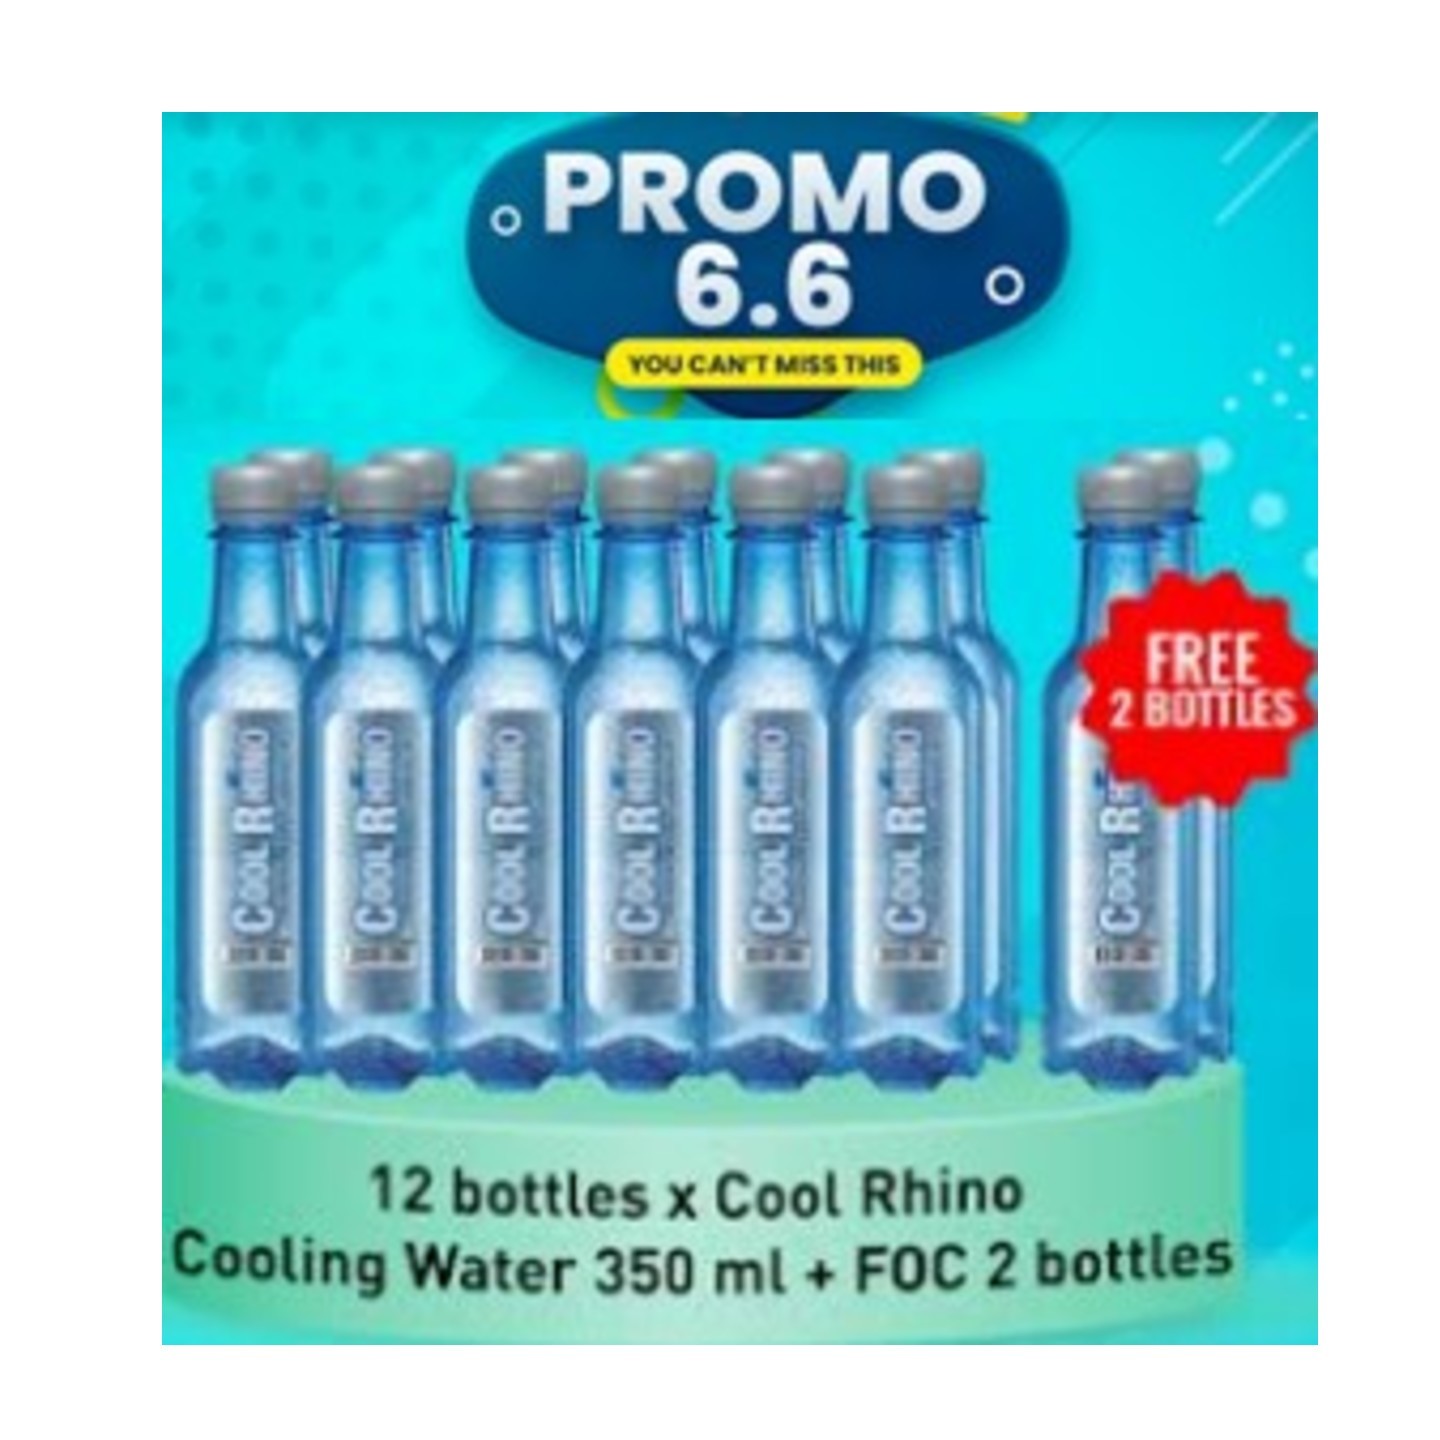 PACKAGE 5 COOL RHINO COOLING WATER 350ML x 12 + FOC COOL RHINO COOLING WATER 350ML x 2